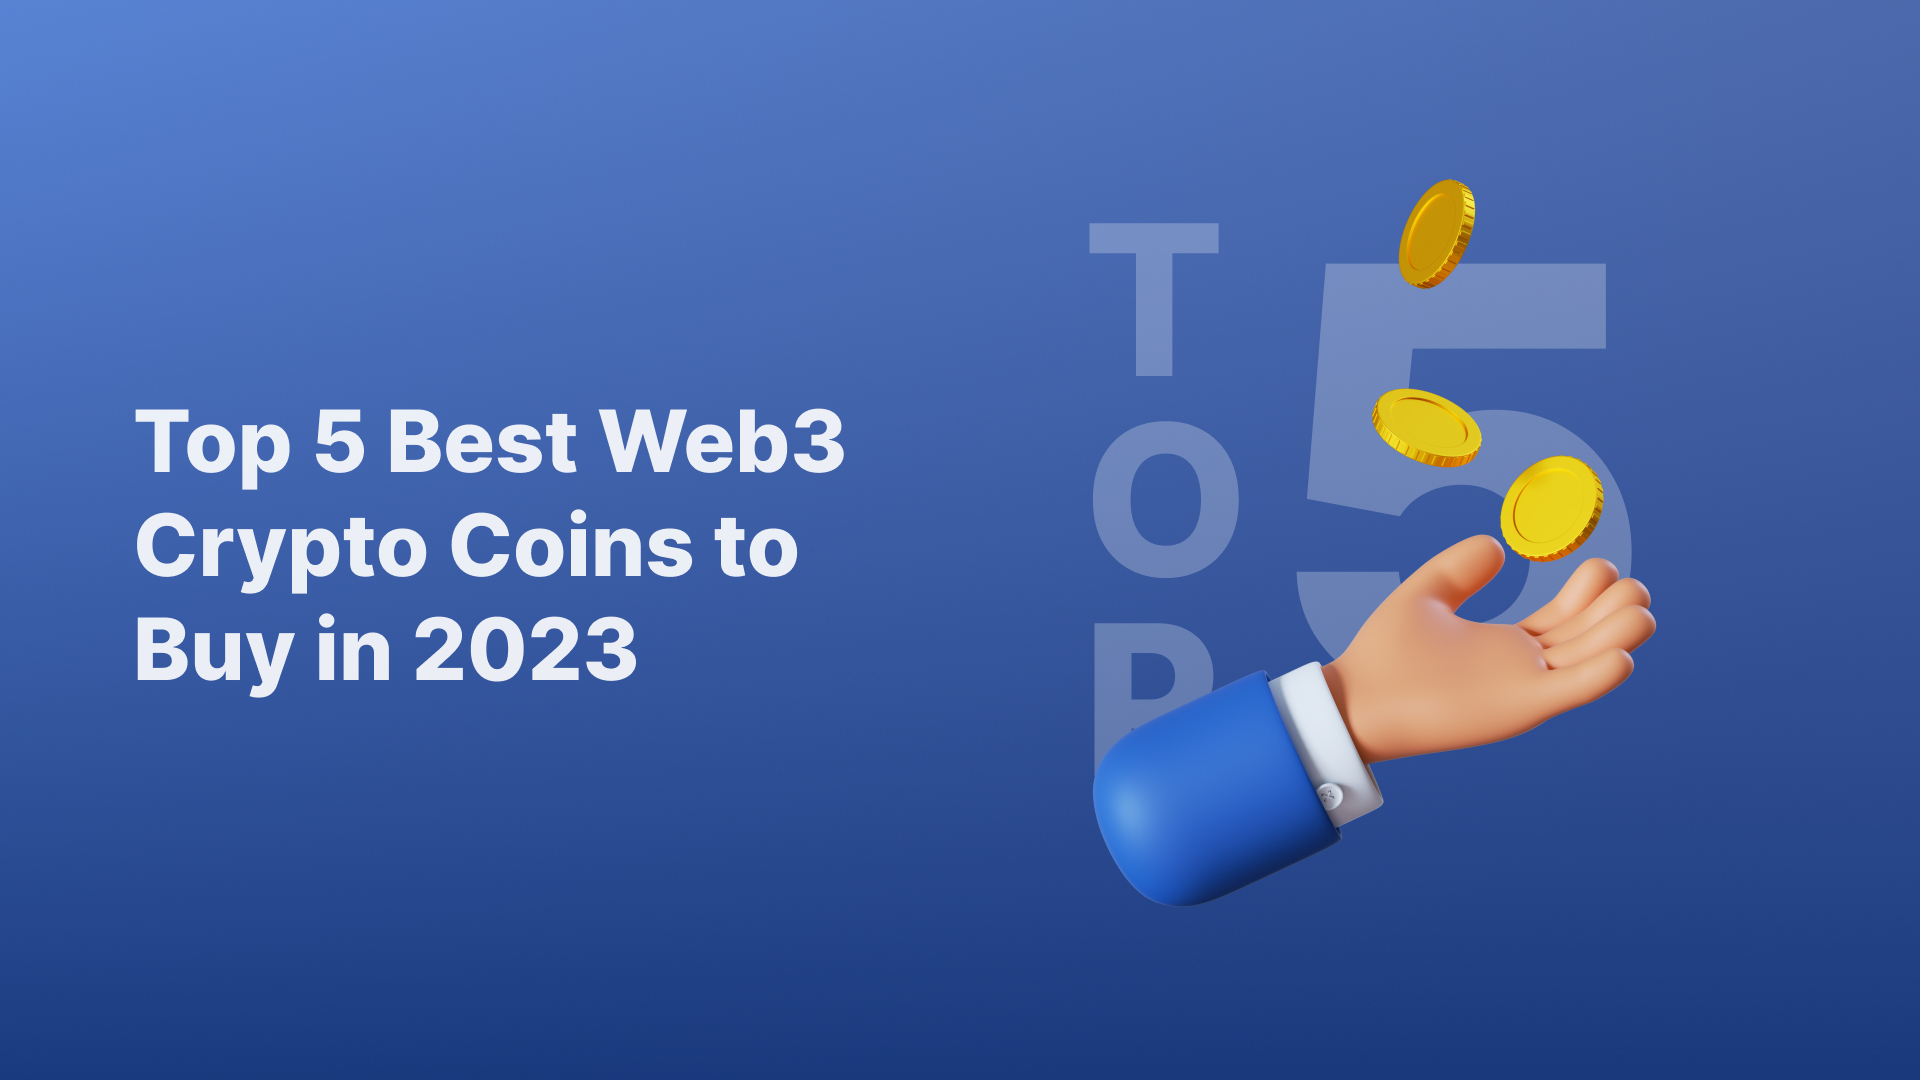 Top 5 Best Web3 Crypto Coins to Buy in 2023